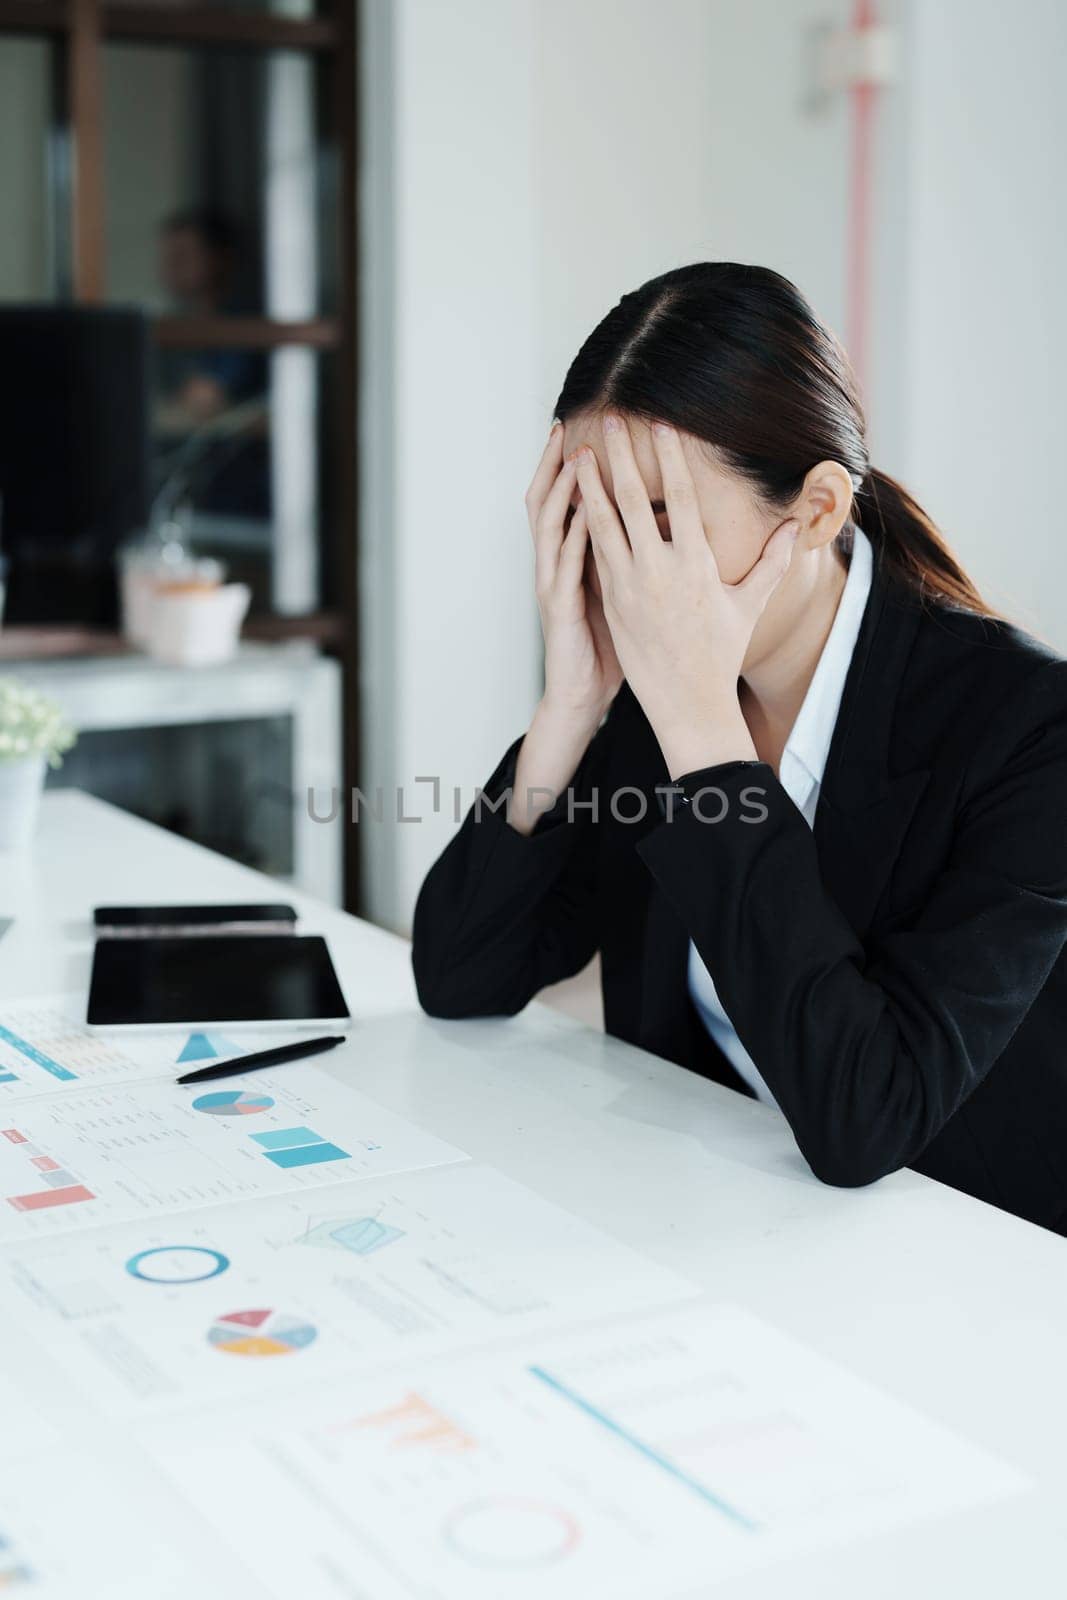 A portrait of a beautiful Asian female employee showing a stressed face while using financial documents on her desk by Manastrong